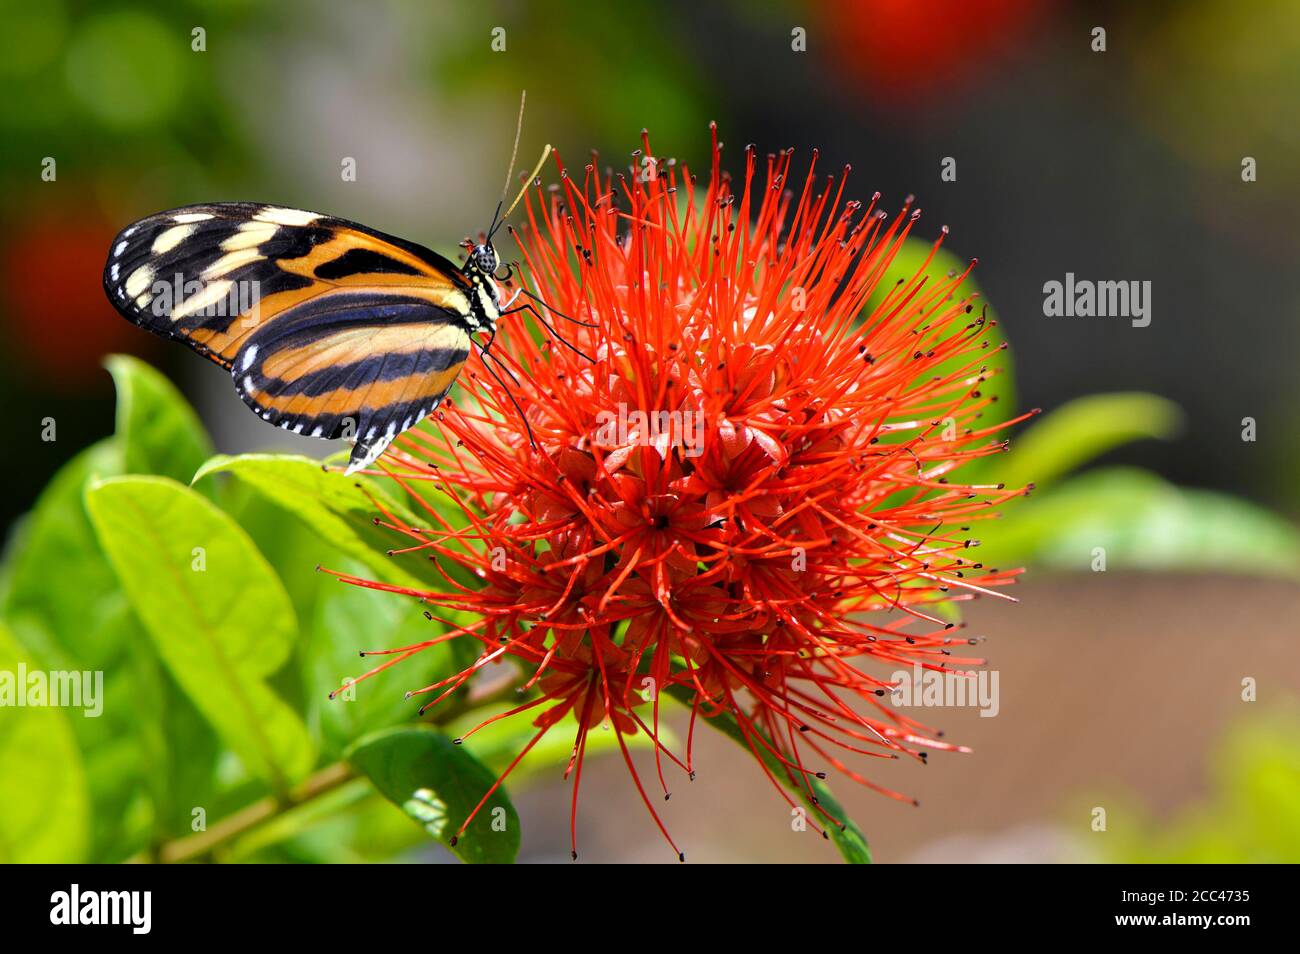 A painted lady butterfly Latin name vanessa cardui on a Powderpuff combretum flower Latin name Combretum constrictum Stock Photo